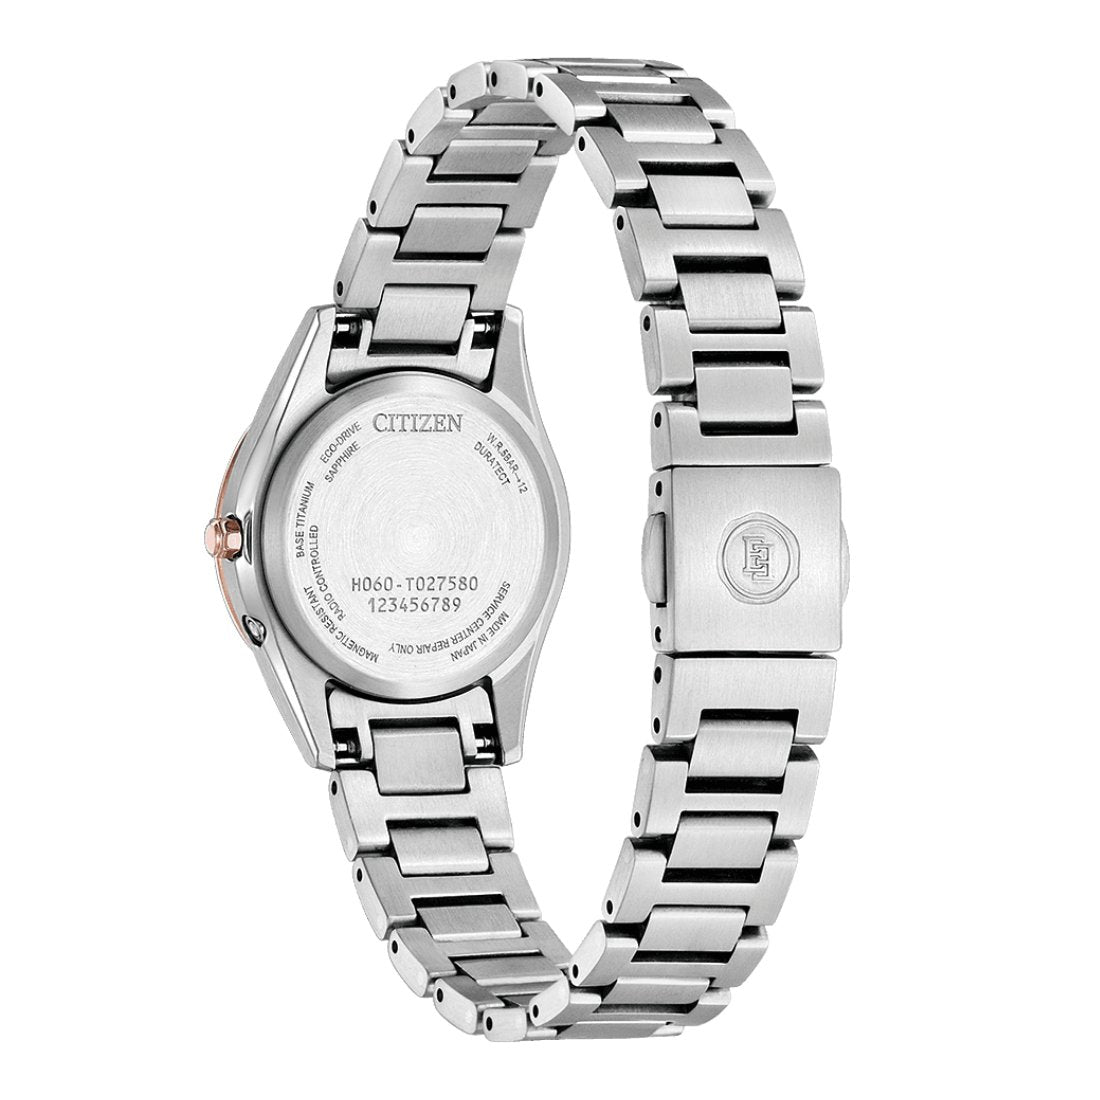 Citizen ES9375-51A Exceed Limited Edition Eco-Drive Casual Watch (PRE-ORDER) -Citizen